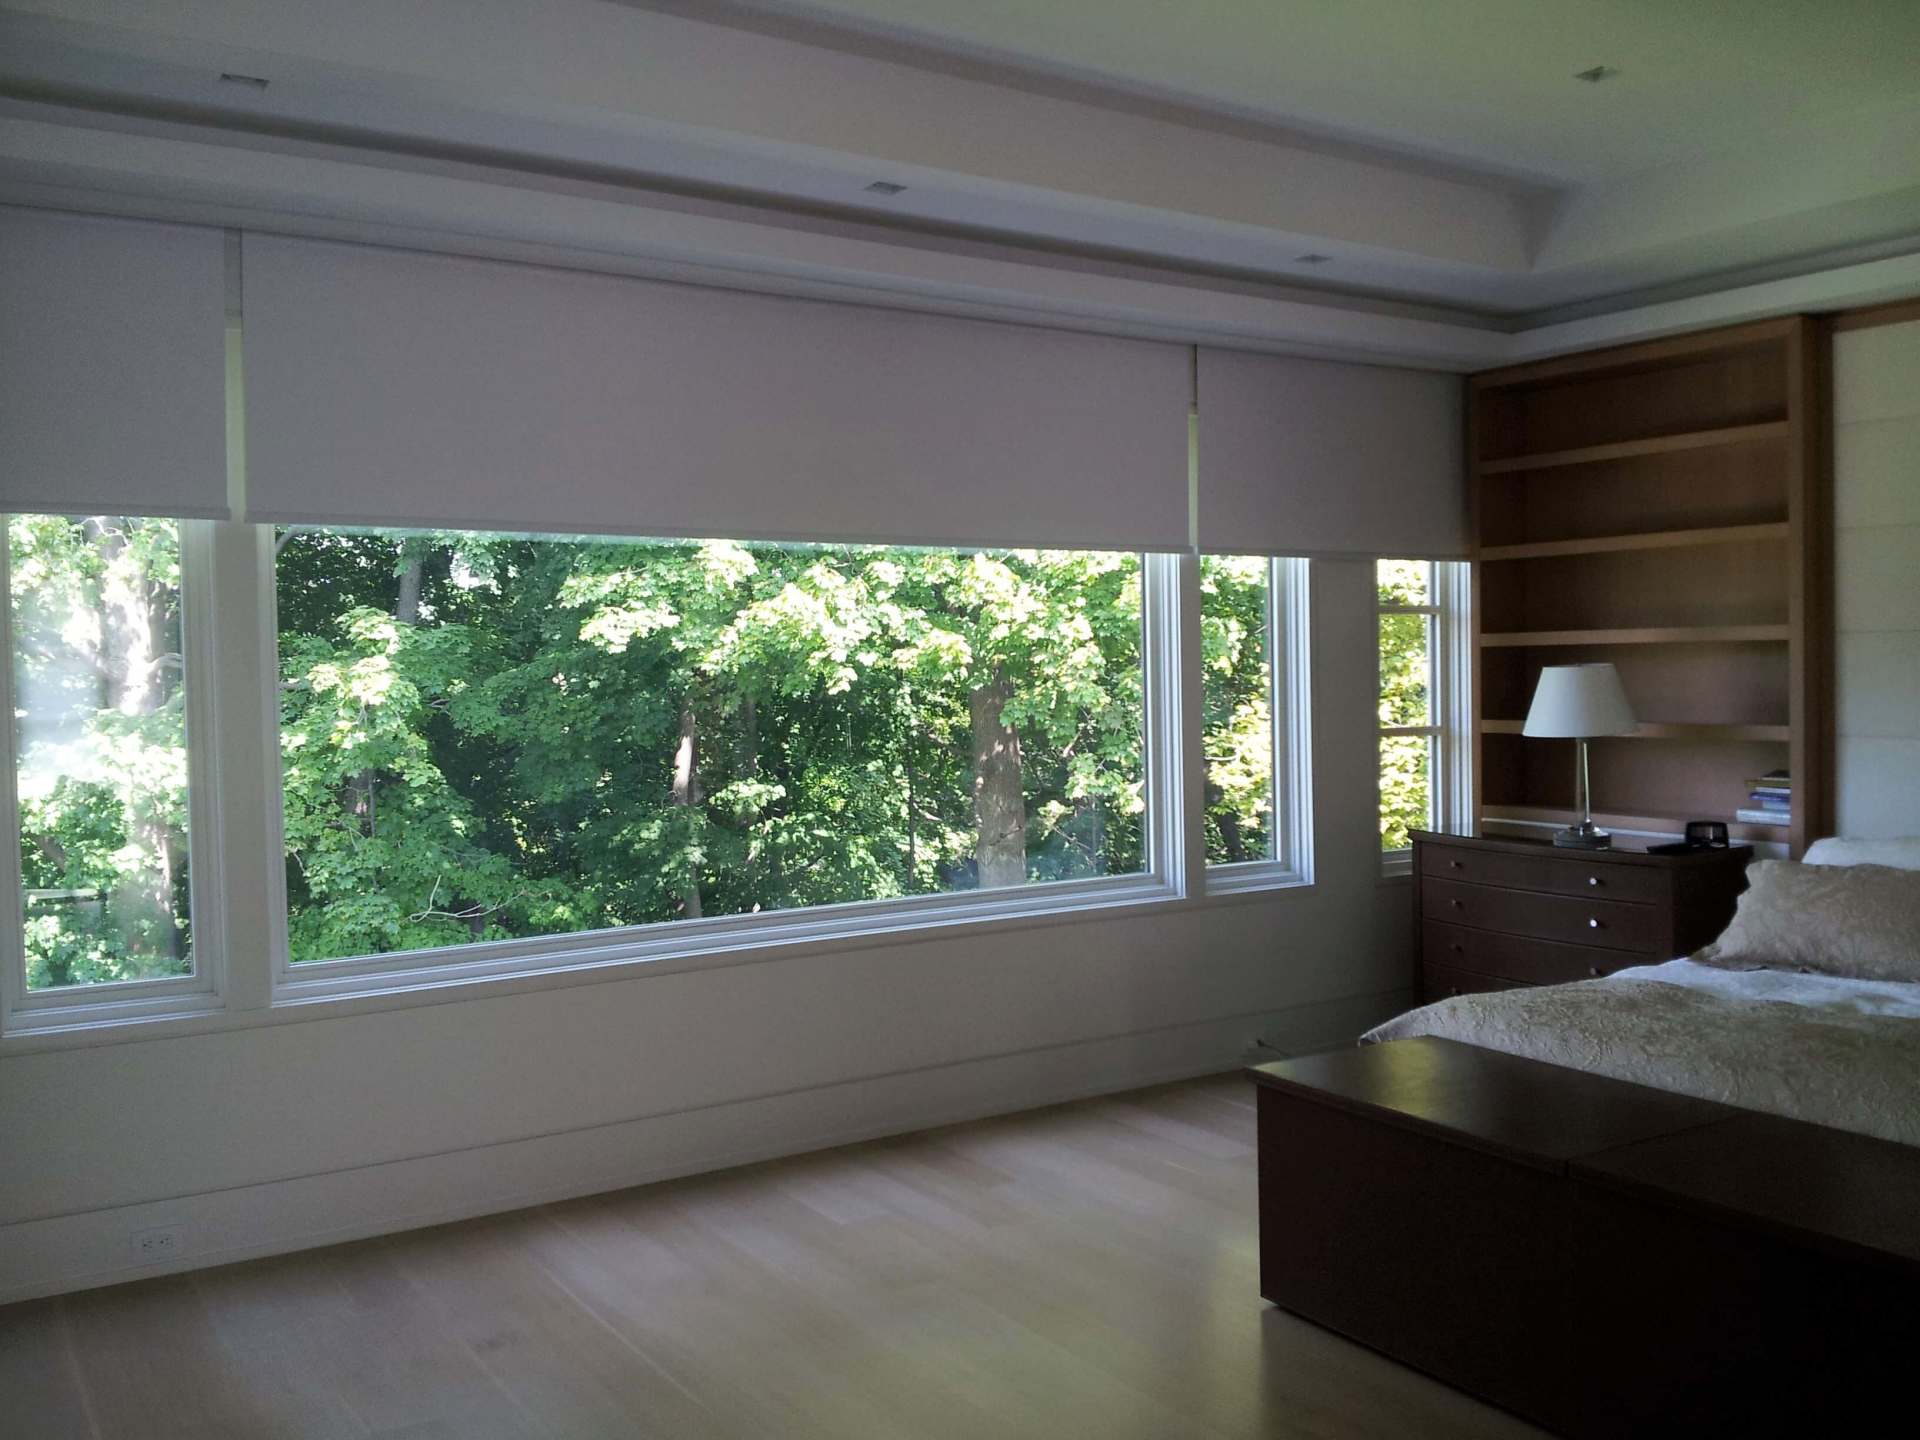 Automated-Room-darkening-shades-Blinds Couture